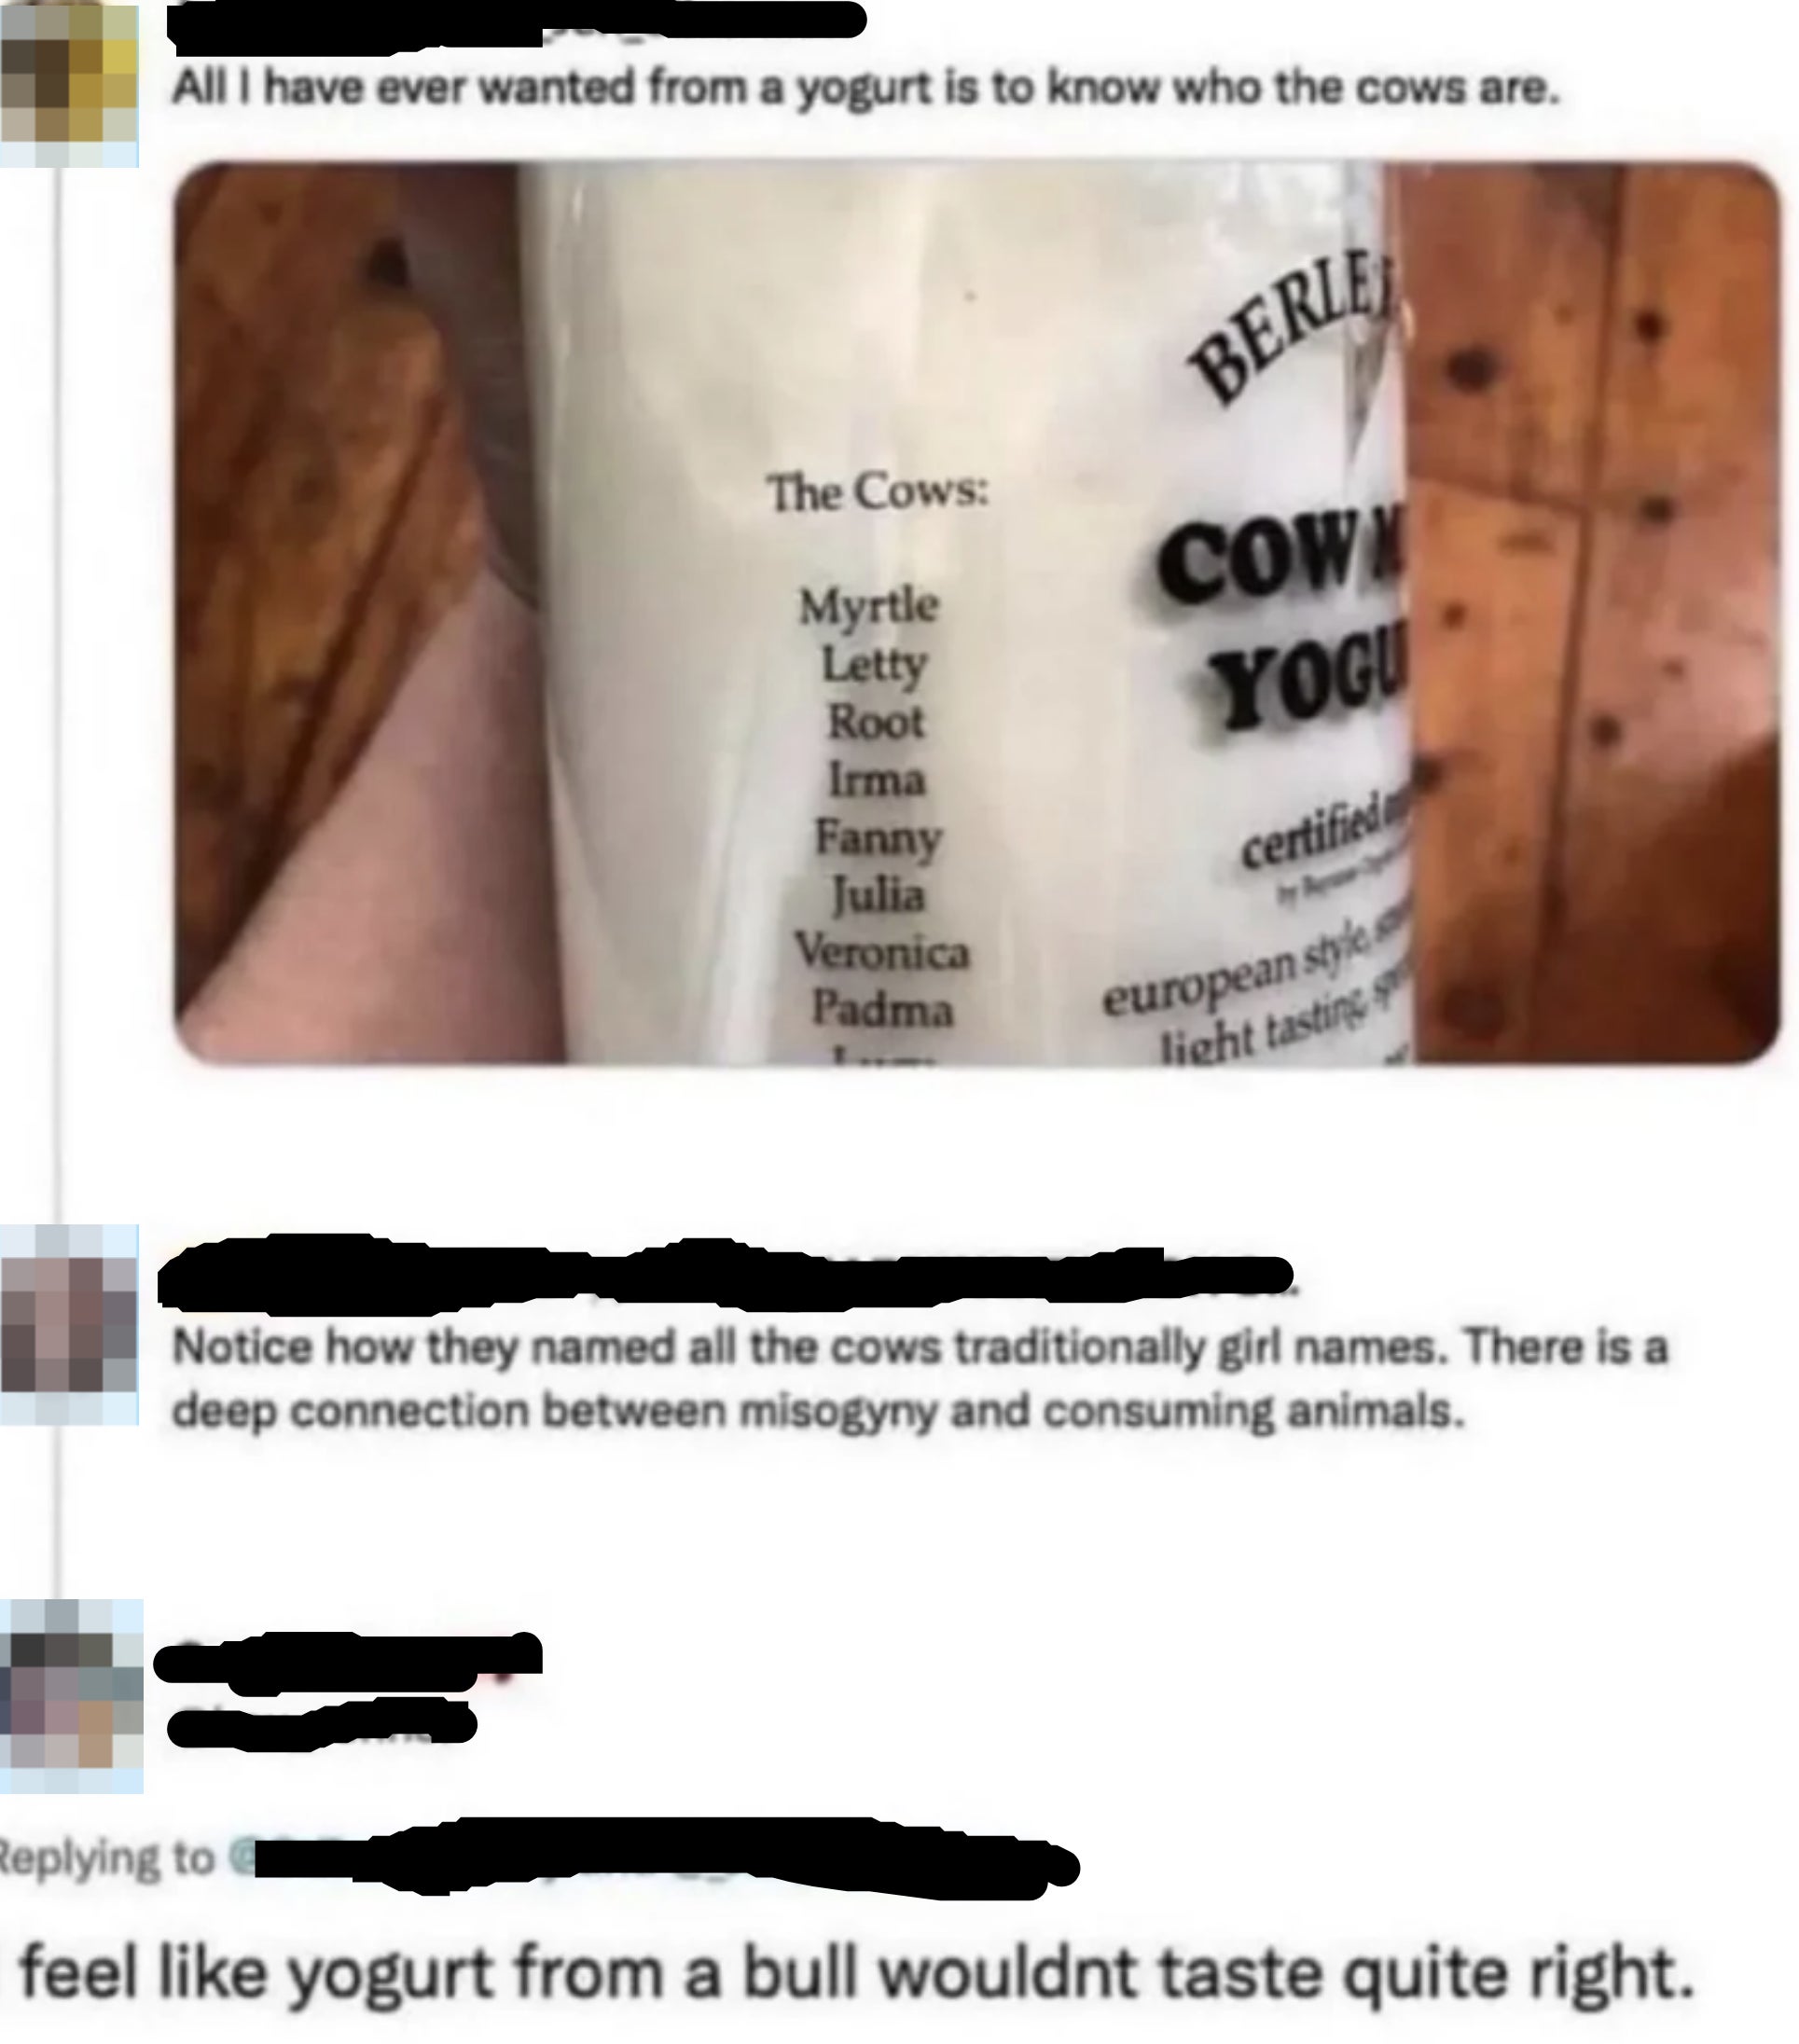 A person pointing out that cow names were predominantly female